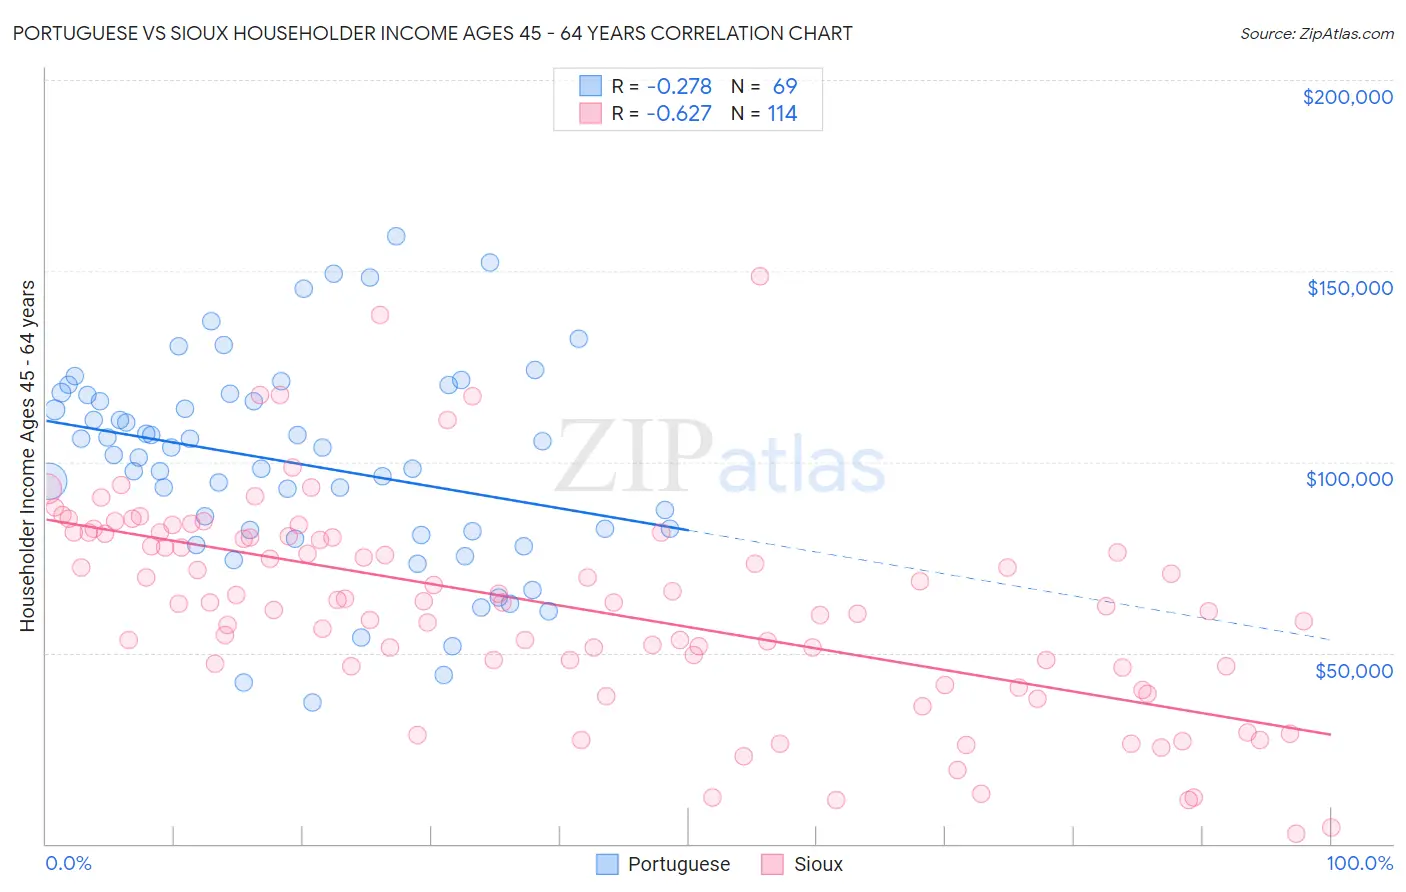 Portuguese vs Sioux Householder Income Ages 45 - 64 years